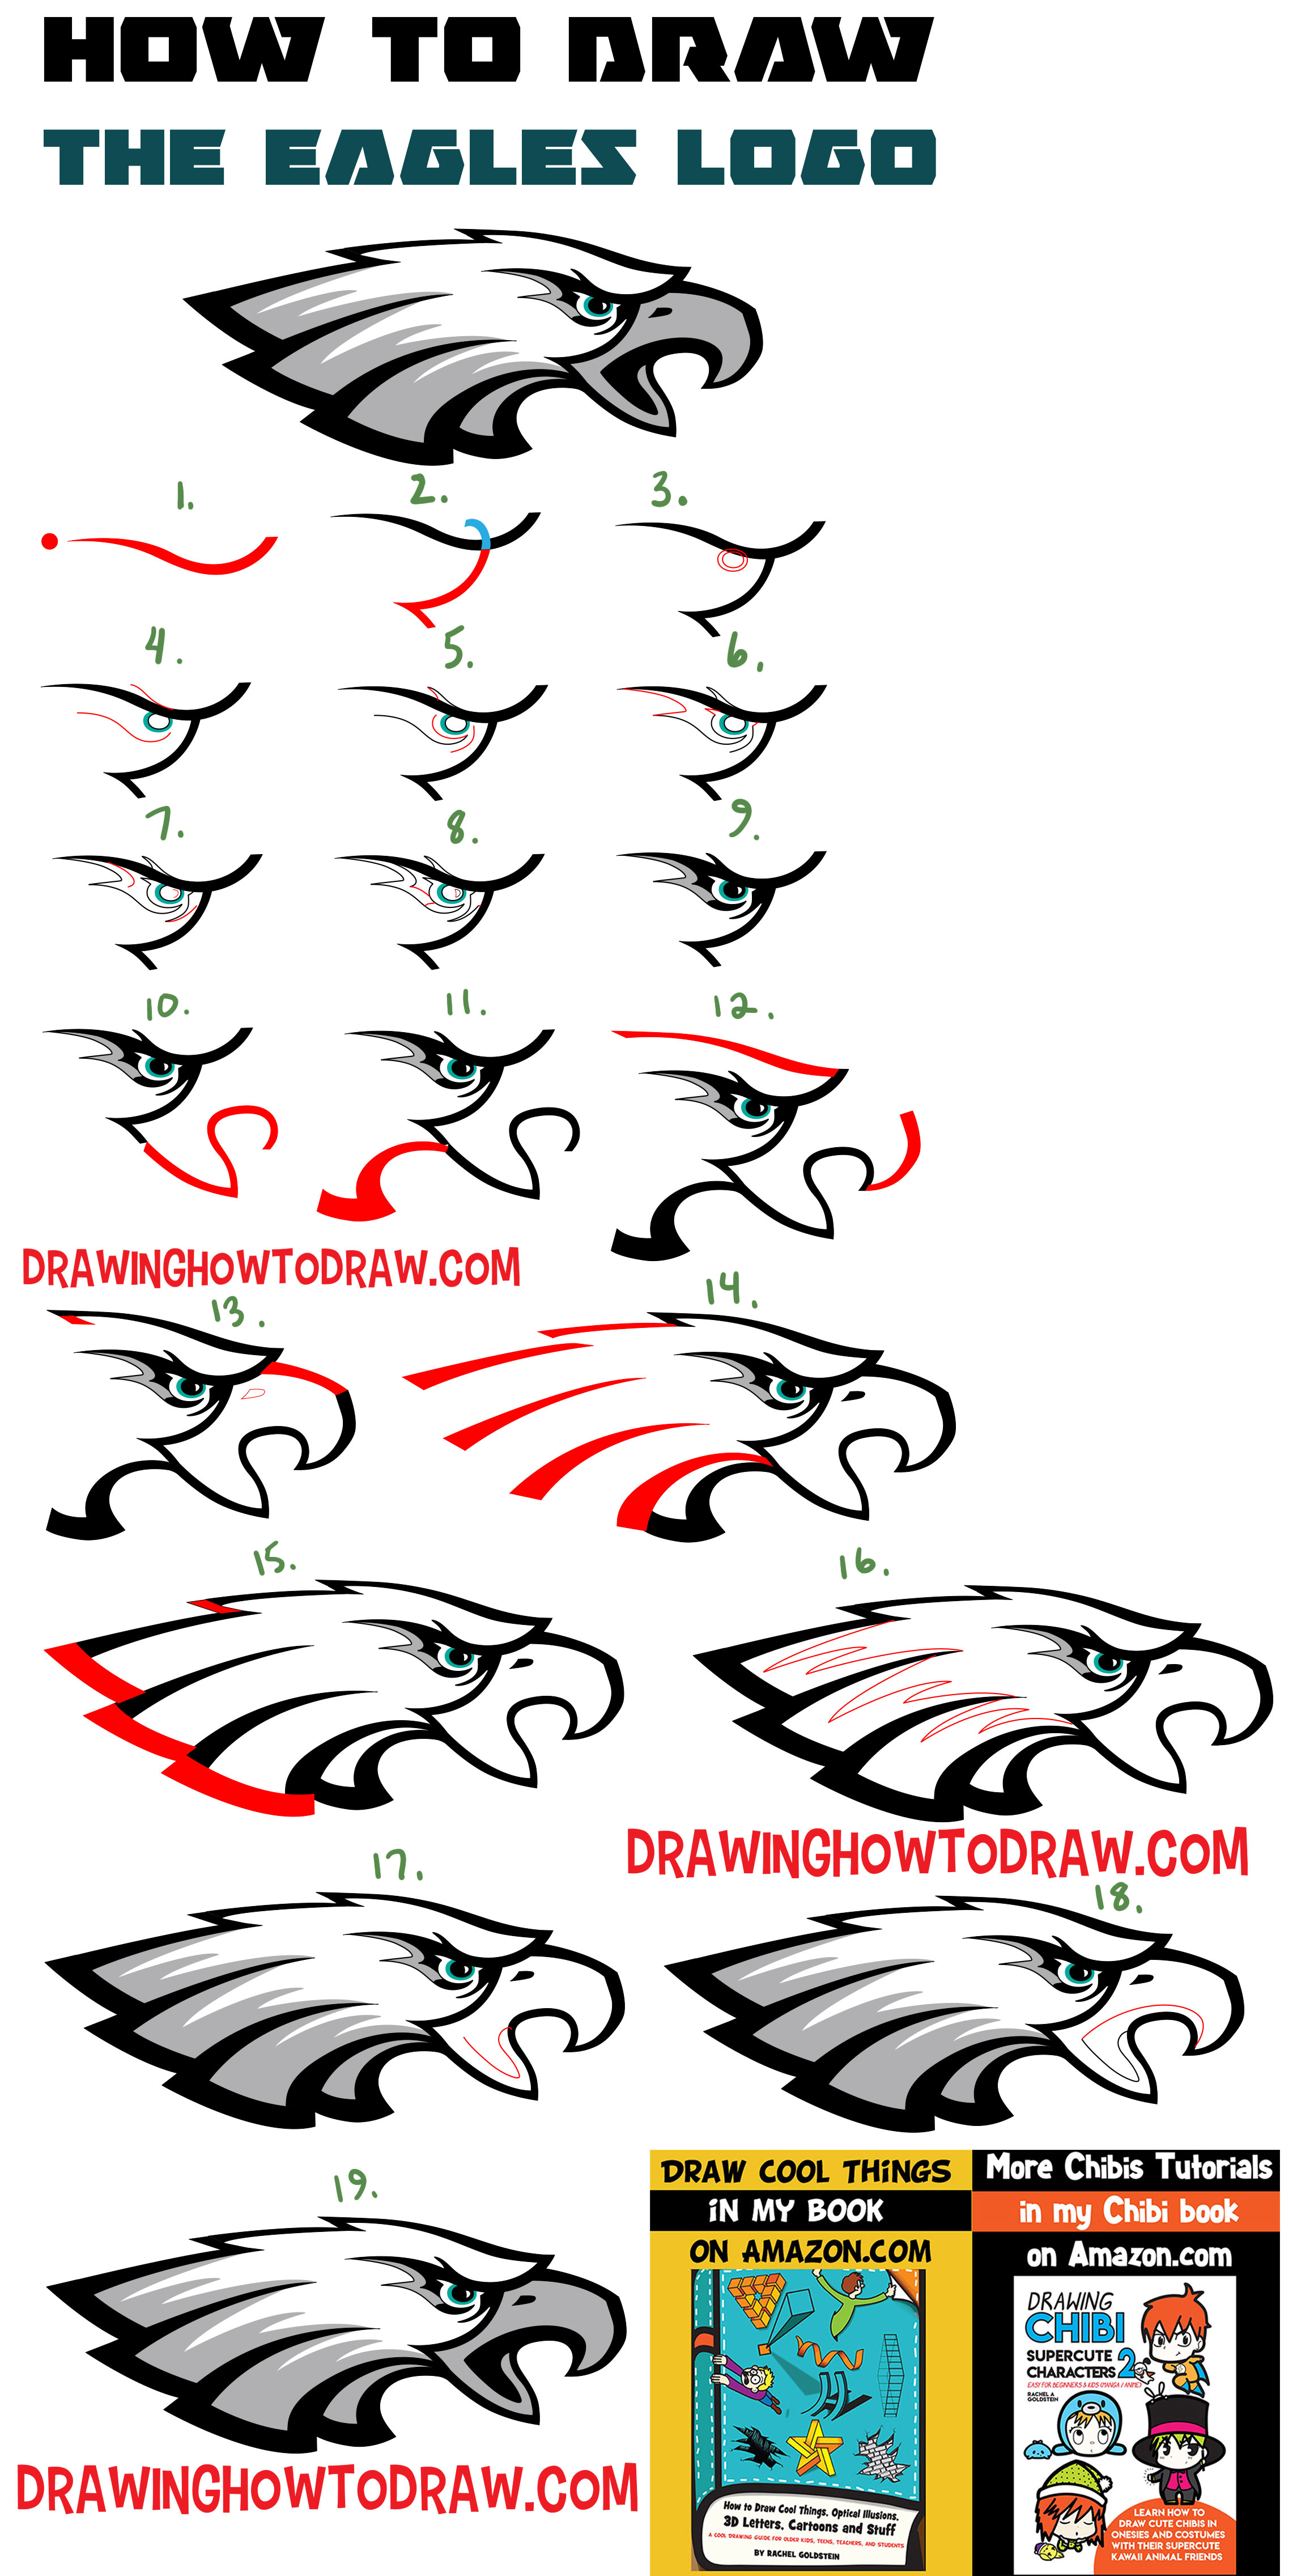 How to Draw the Eagle's Logo with Easy Step by Step Drawing Lesson for Beginners